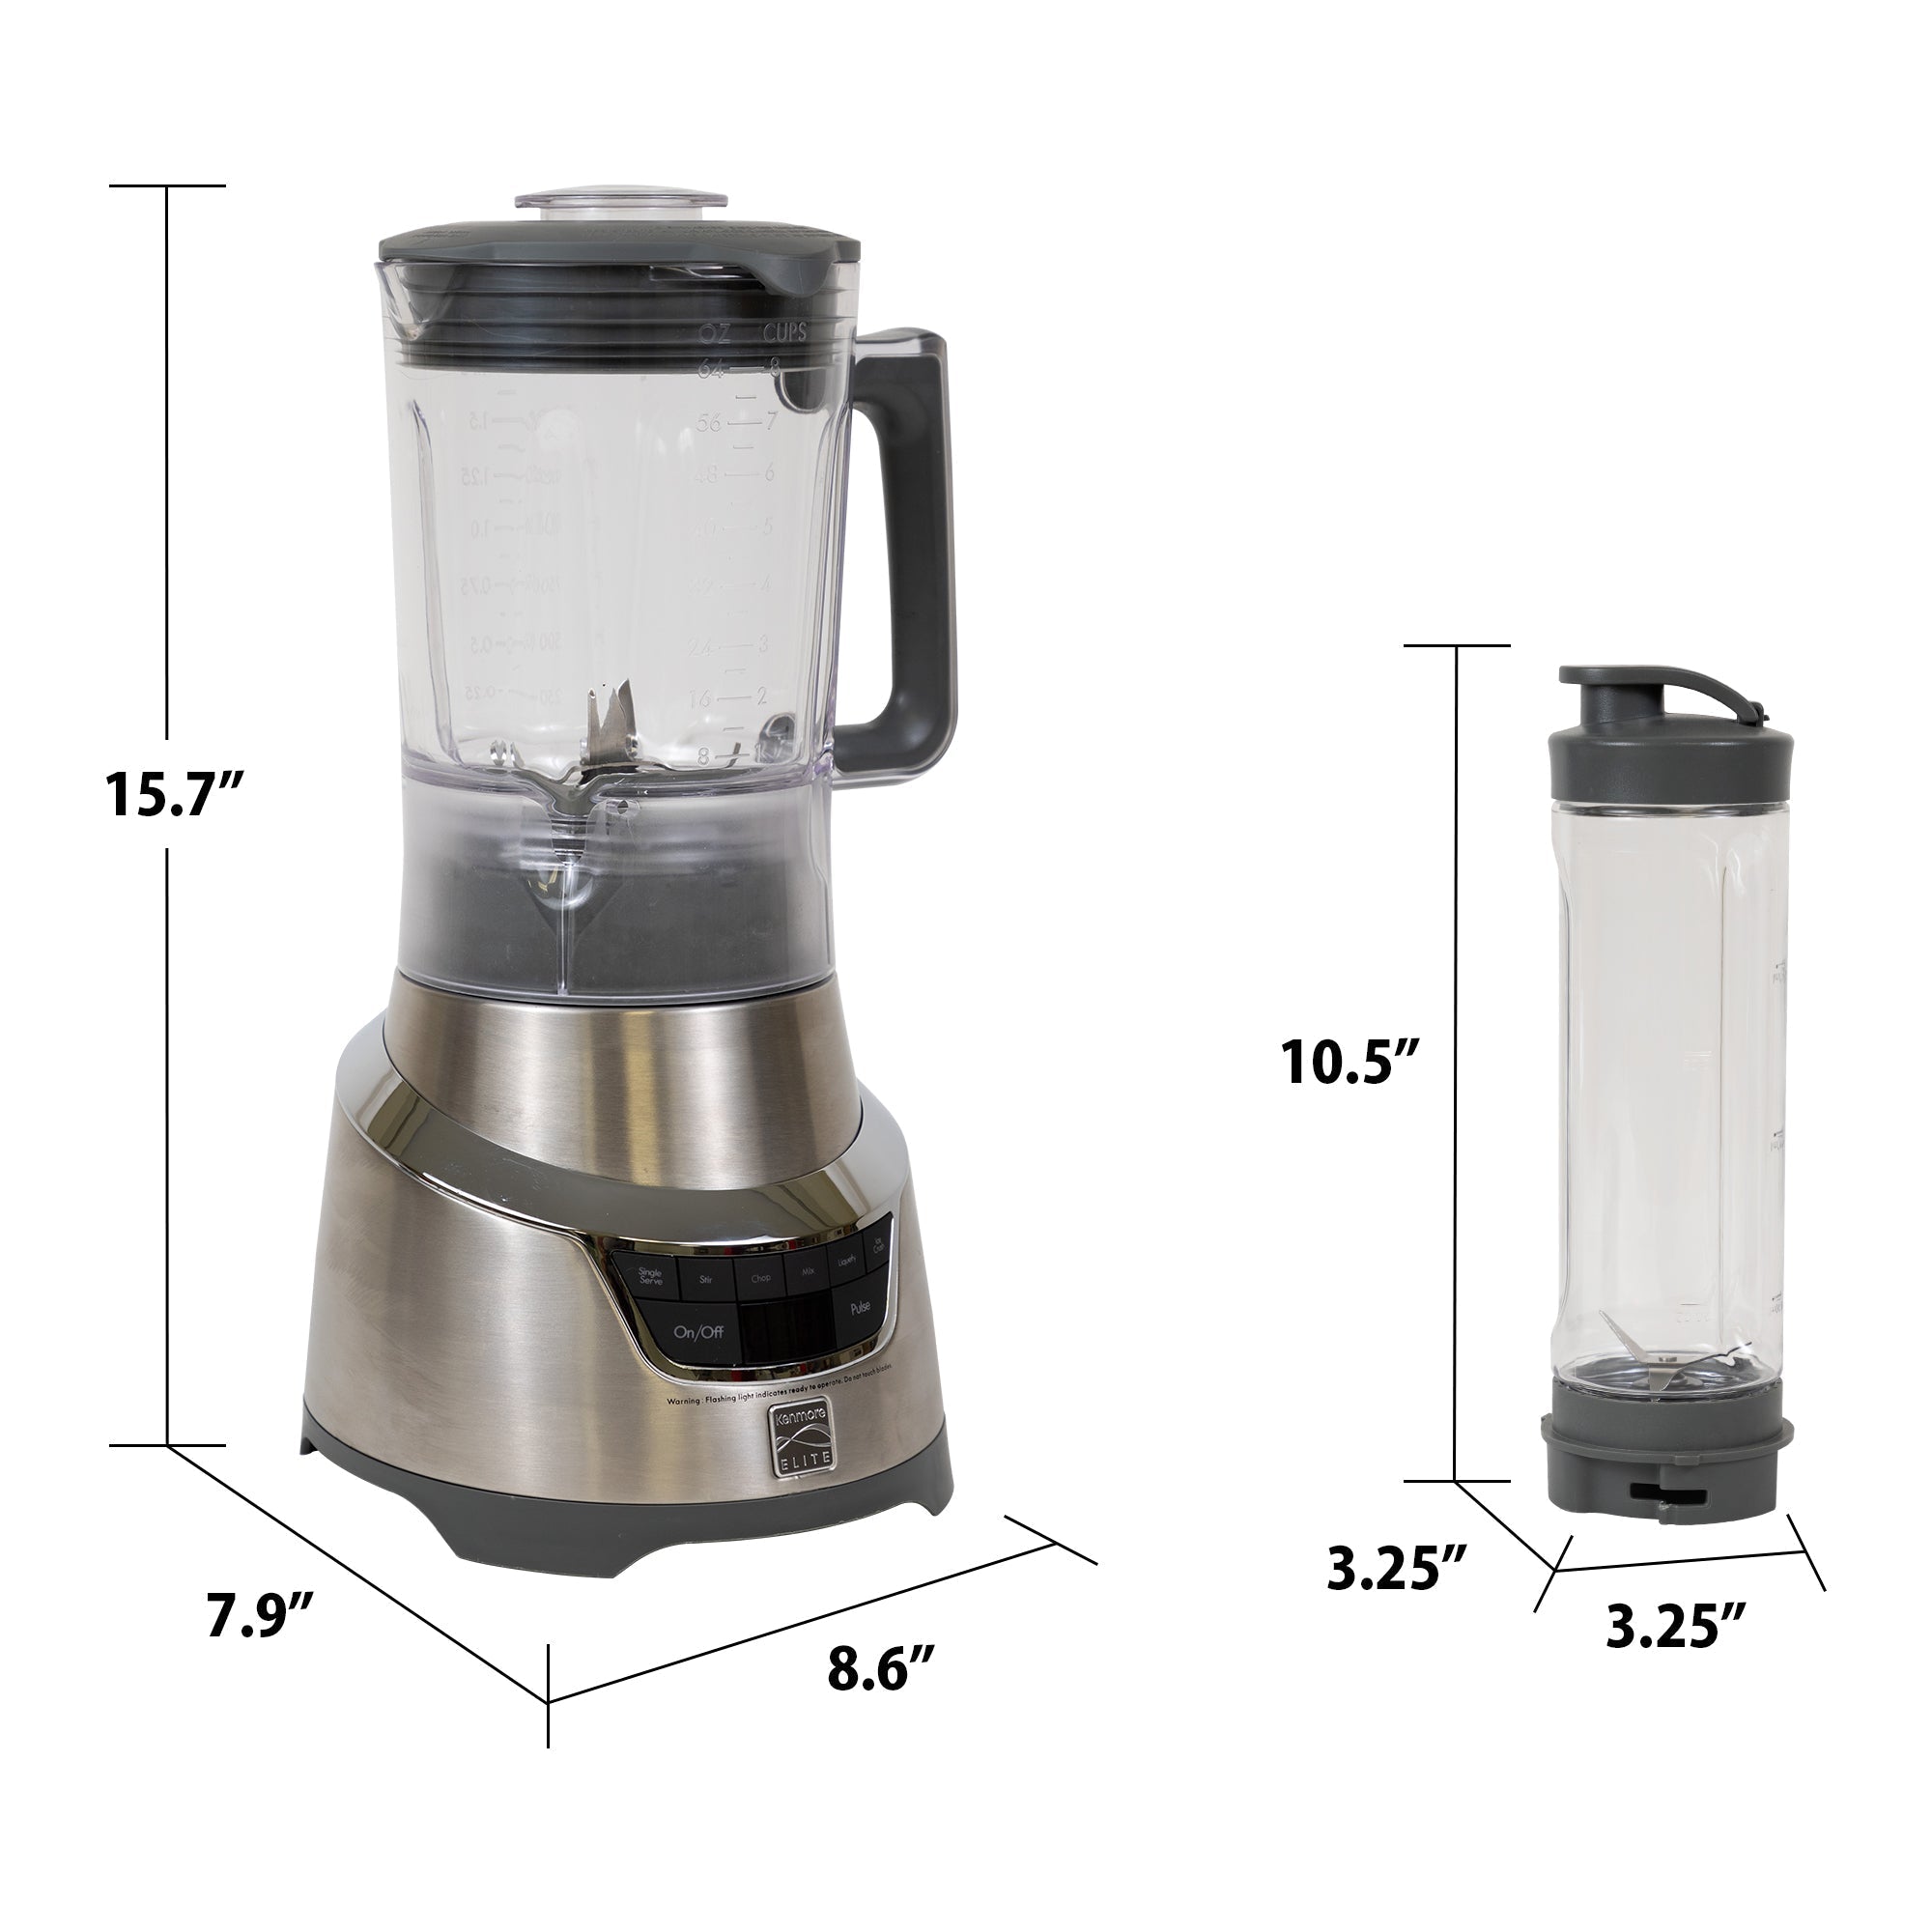 Product shot of Elite 1.3 HP blender and travel blending cup on white background with dimensions